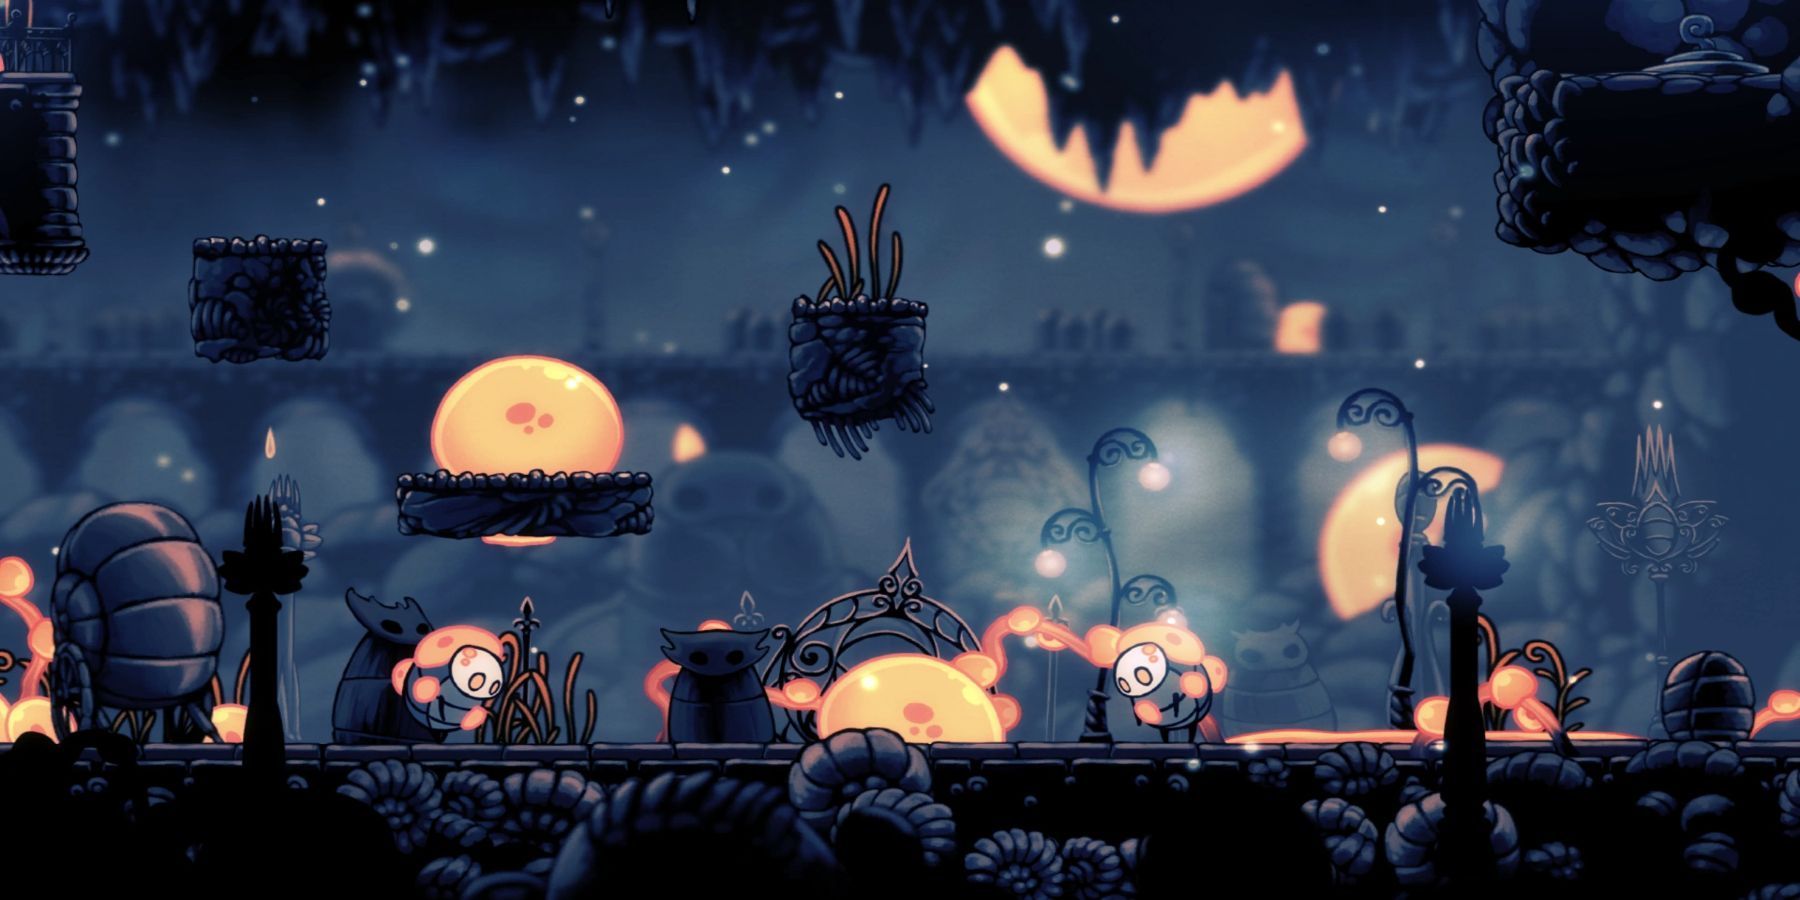 The Infected Crossroads from Hollow Knight